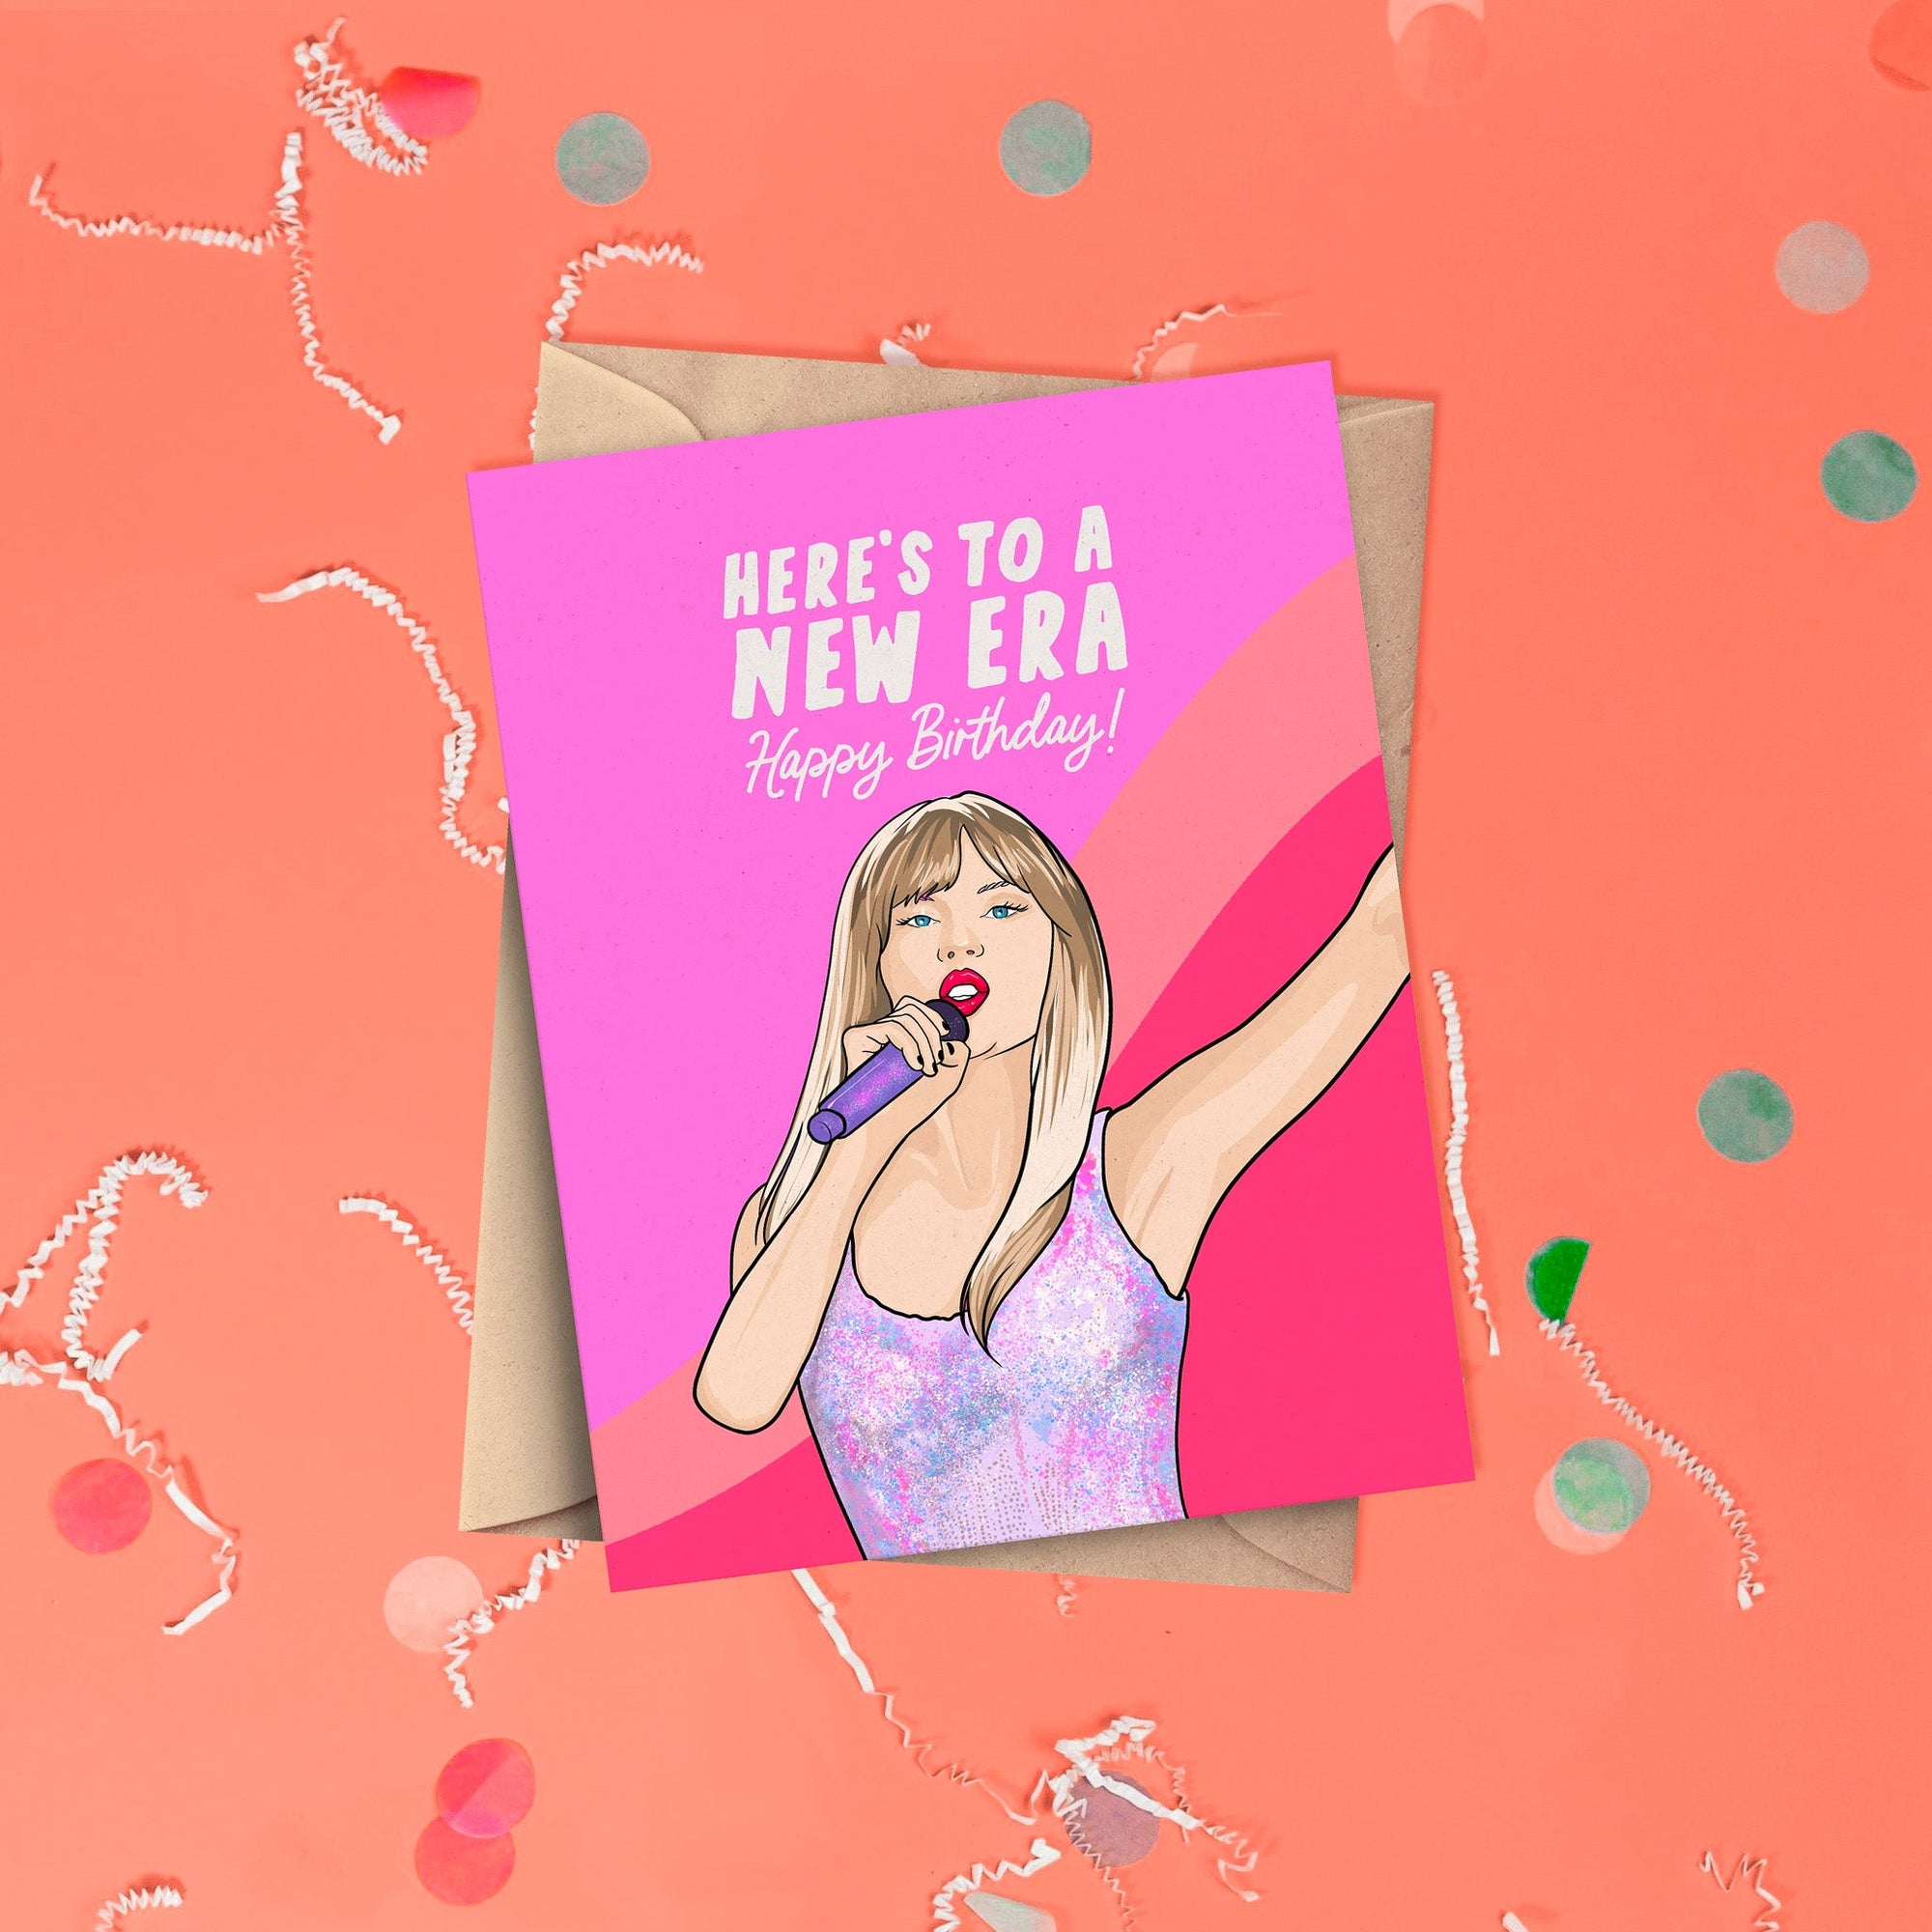 On a coral pink background sits a card with white crinkle and big, colorful confetti scattered around. This Taylor Swift inspired card has wavy colors of pink, coral, and hot pink. There is an illustration of Taylor Swift singing and it says "HERE'S TO A NEW ERA Happy Birthday!" in white lettering. It has a kraft envelope.